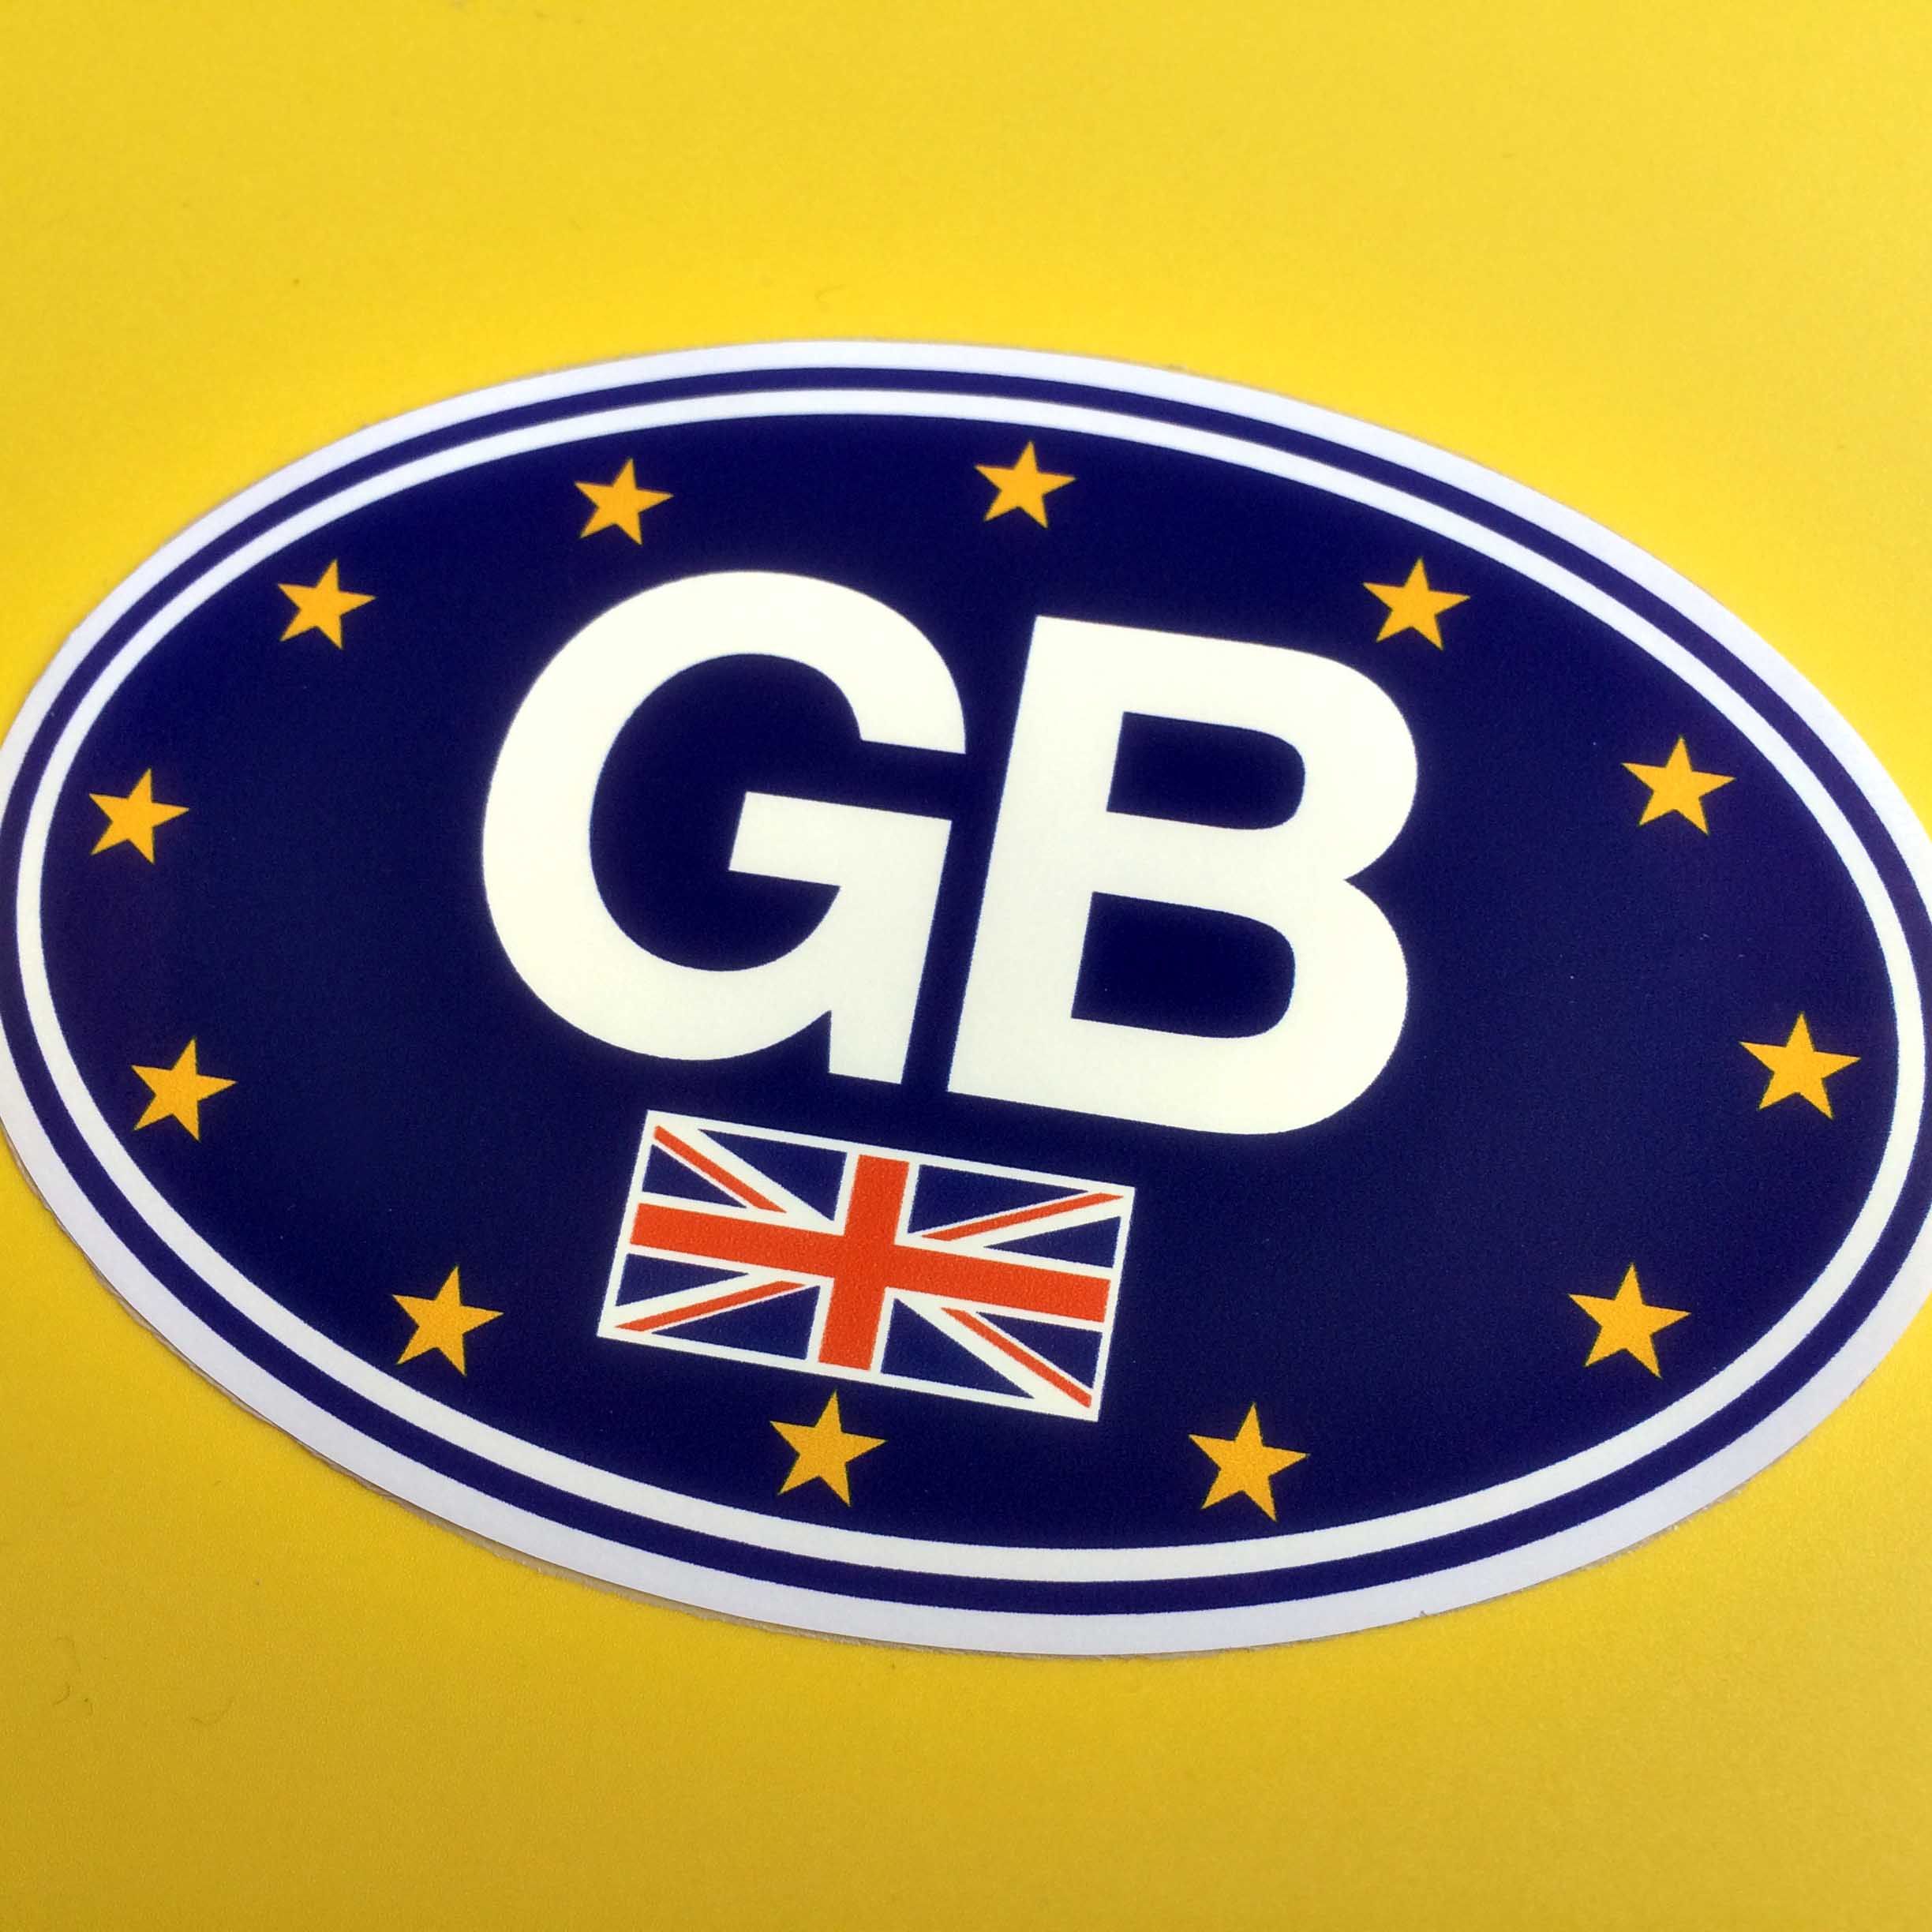 GB in bold white lettering and the Union Jack overlay the European flag on an oval sticker bordered in white.